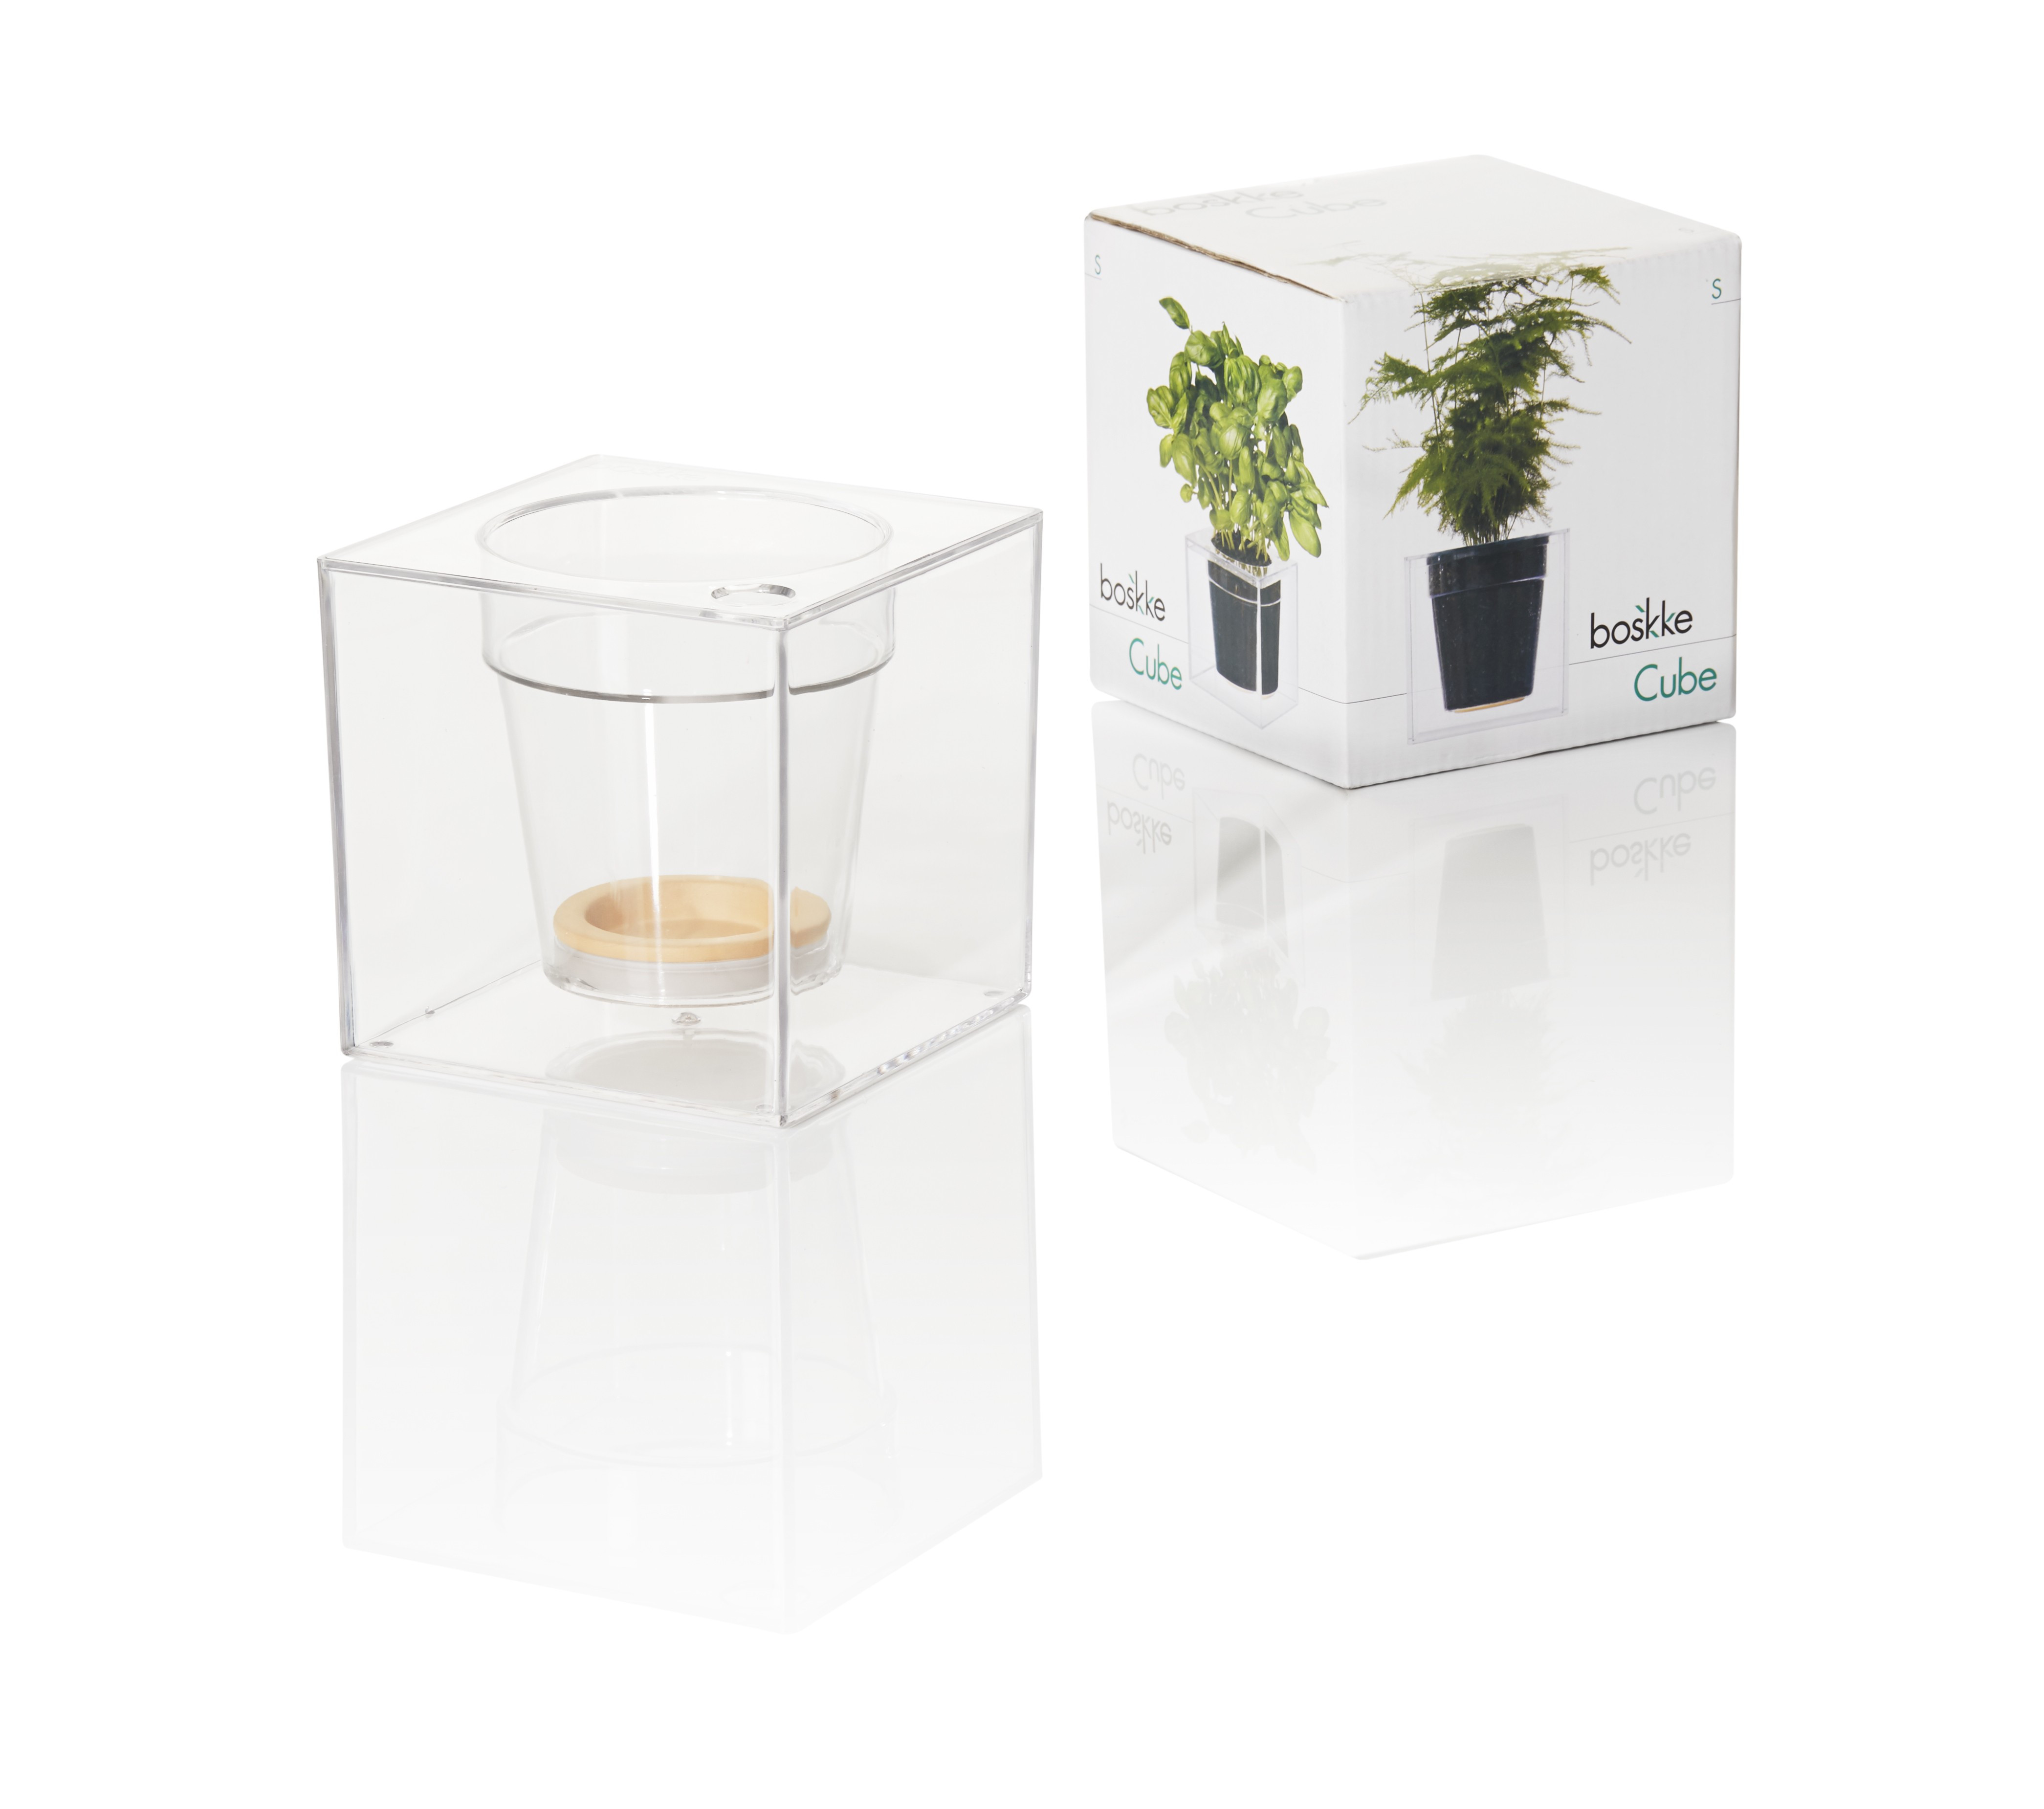 19 Fashionable 4 Inch Cube Vase 2022 free download 4 inch cube vase of boskke cube small planter shop in boskke cube small